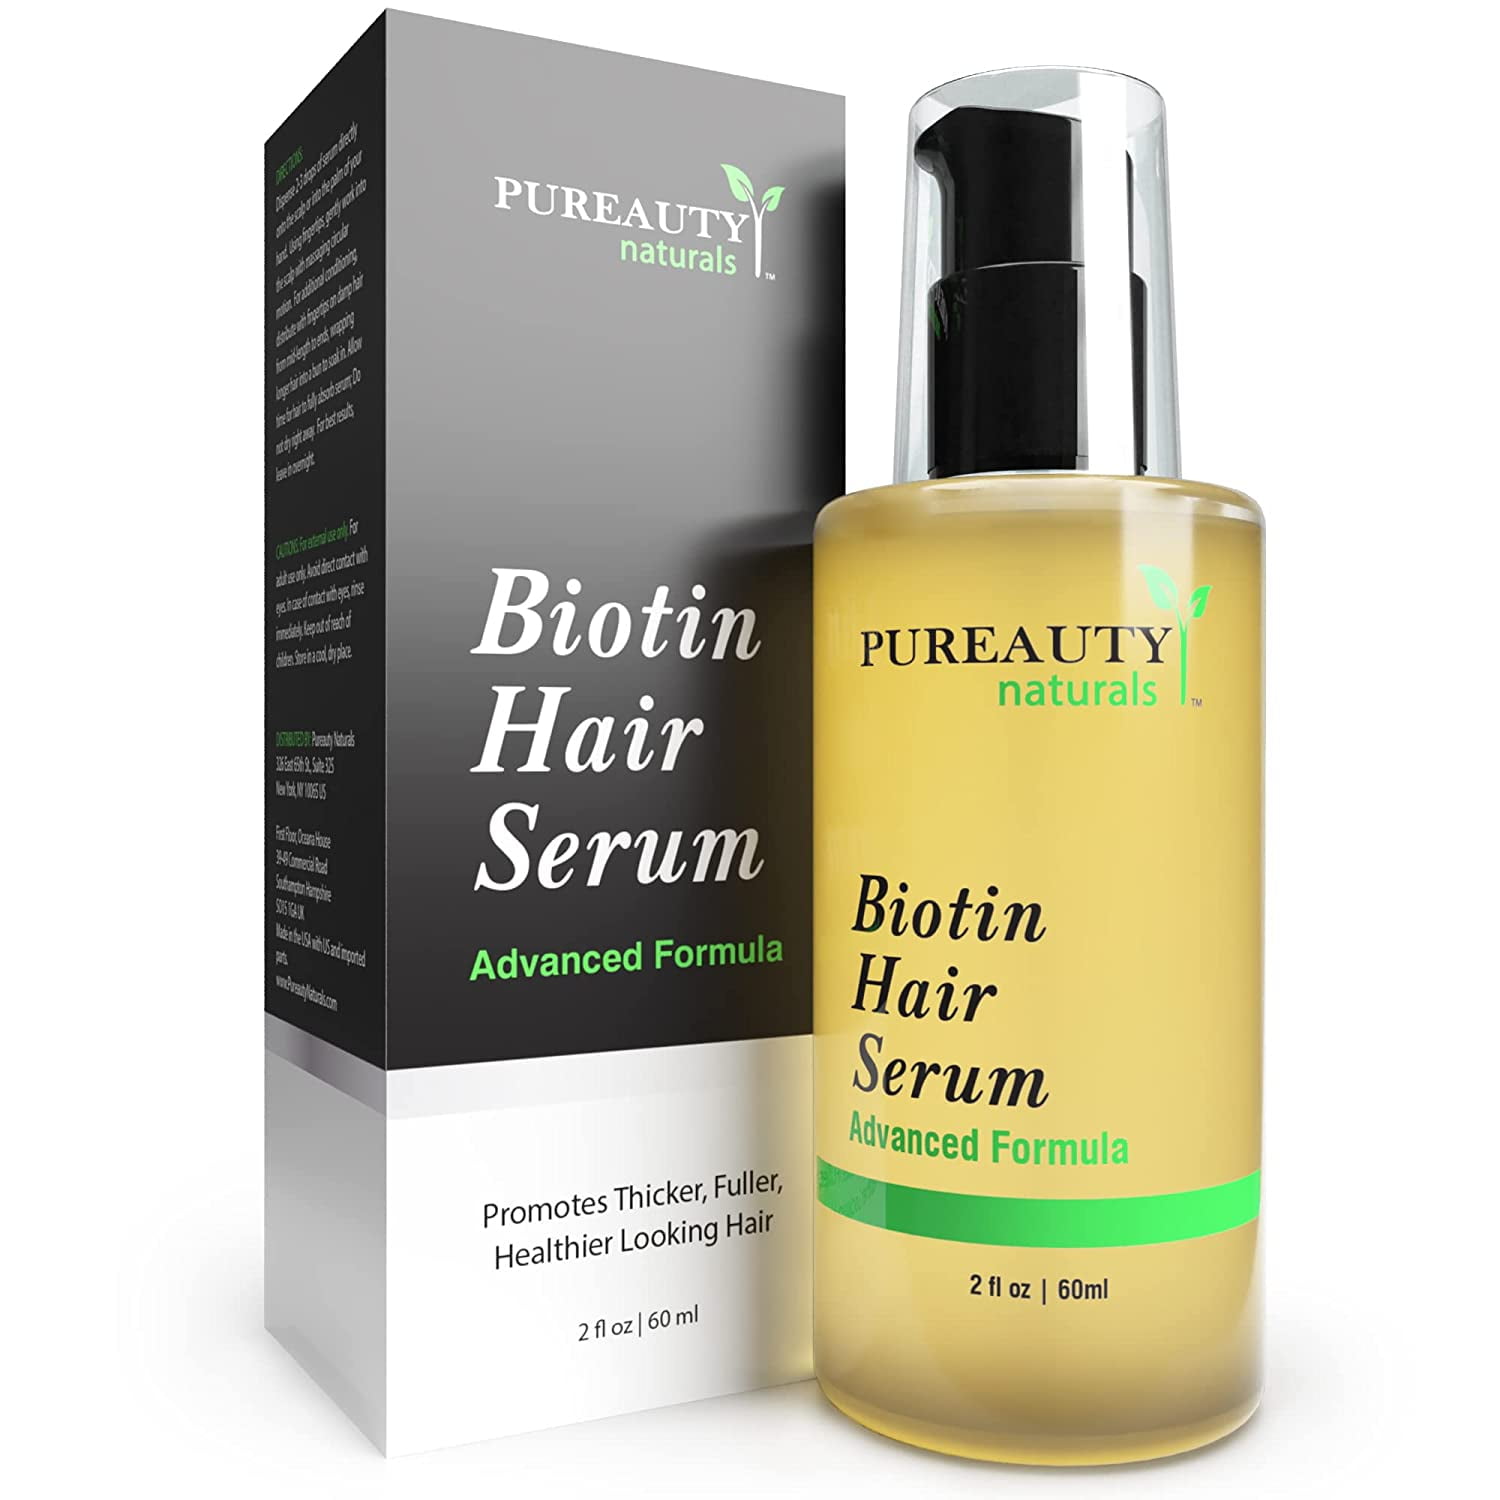 Biotin Hair Growth Serum by Pureauty Naturals - Advanced Topical Formula to  Help Grow Healthy, Strong Hair - Suitable For Men & Women Of All Hair Types  - Hair Loss Support 